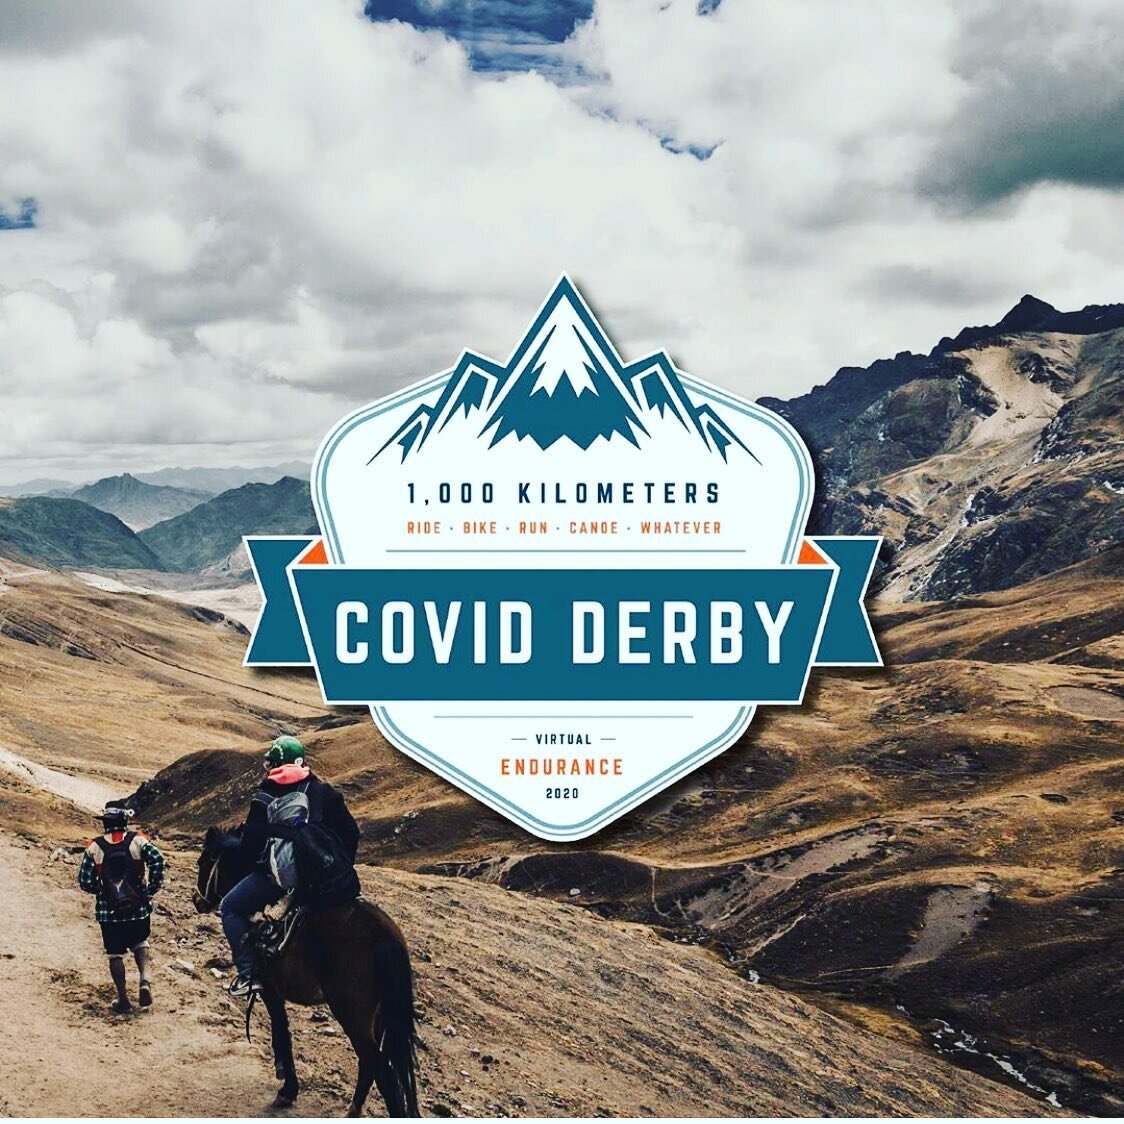 It&rsquo;s day 1 of the #covidderby ! 6 badass women - all contestants of the Mongol Derby 2021- make up team #OG21. We are racing to log 1000 km in August! Any modality: ride, cycle, hike, run, raft, Whatever! Follow me here @deirdredoesthederby and